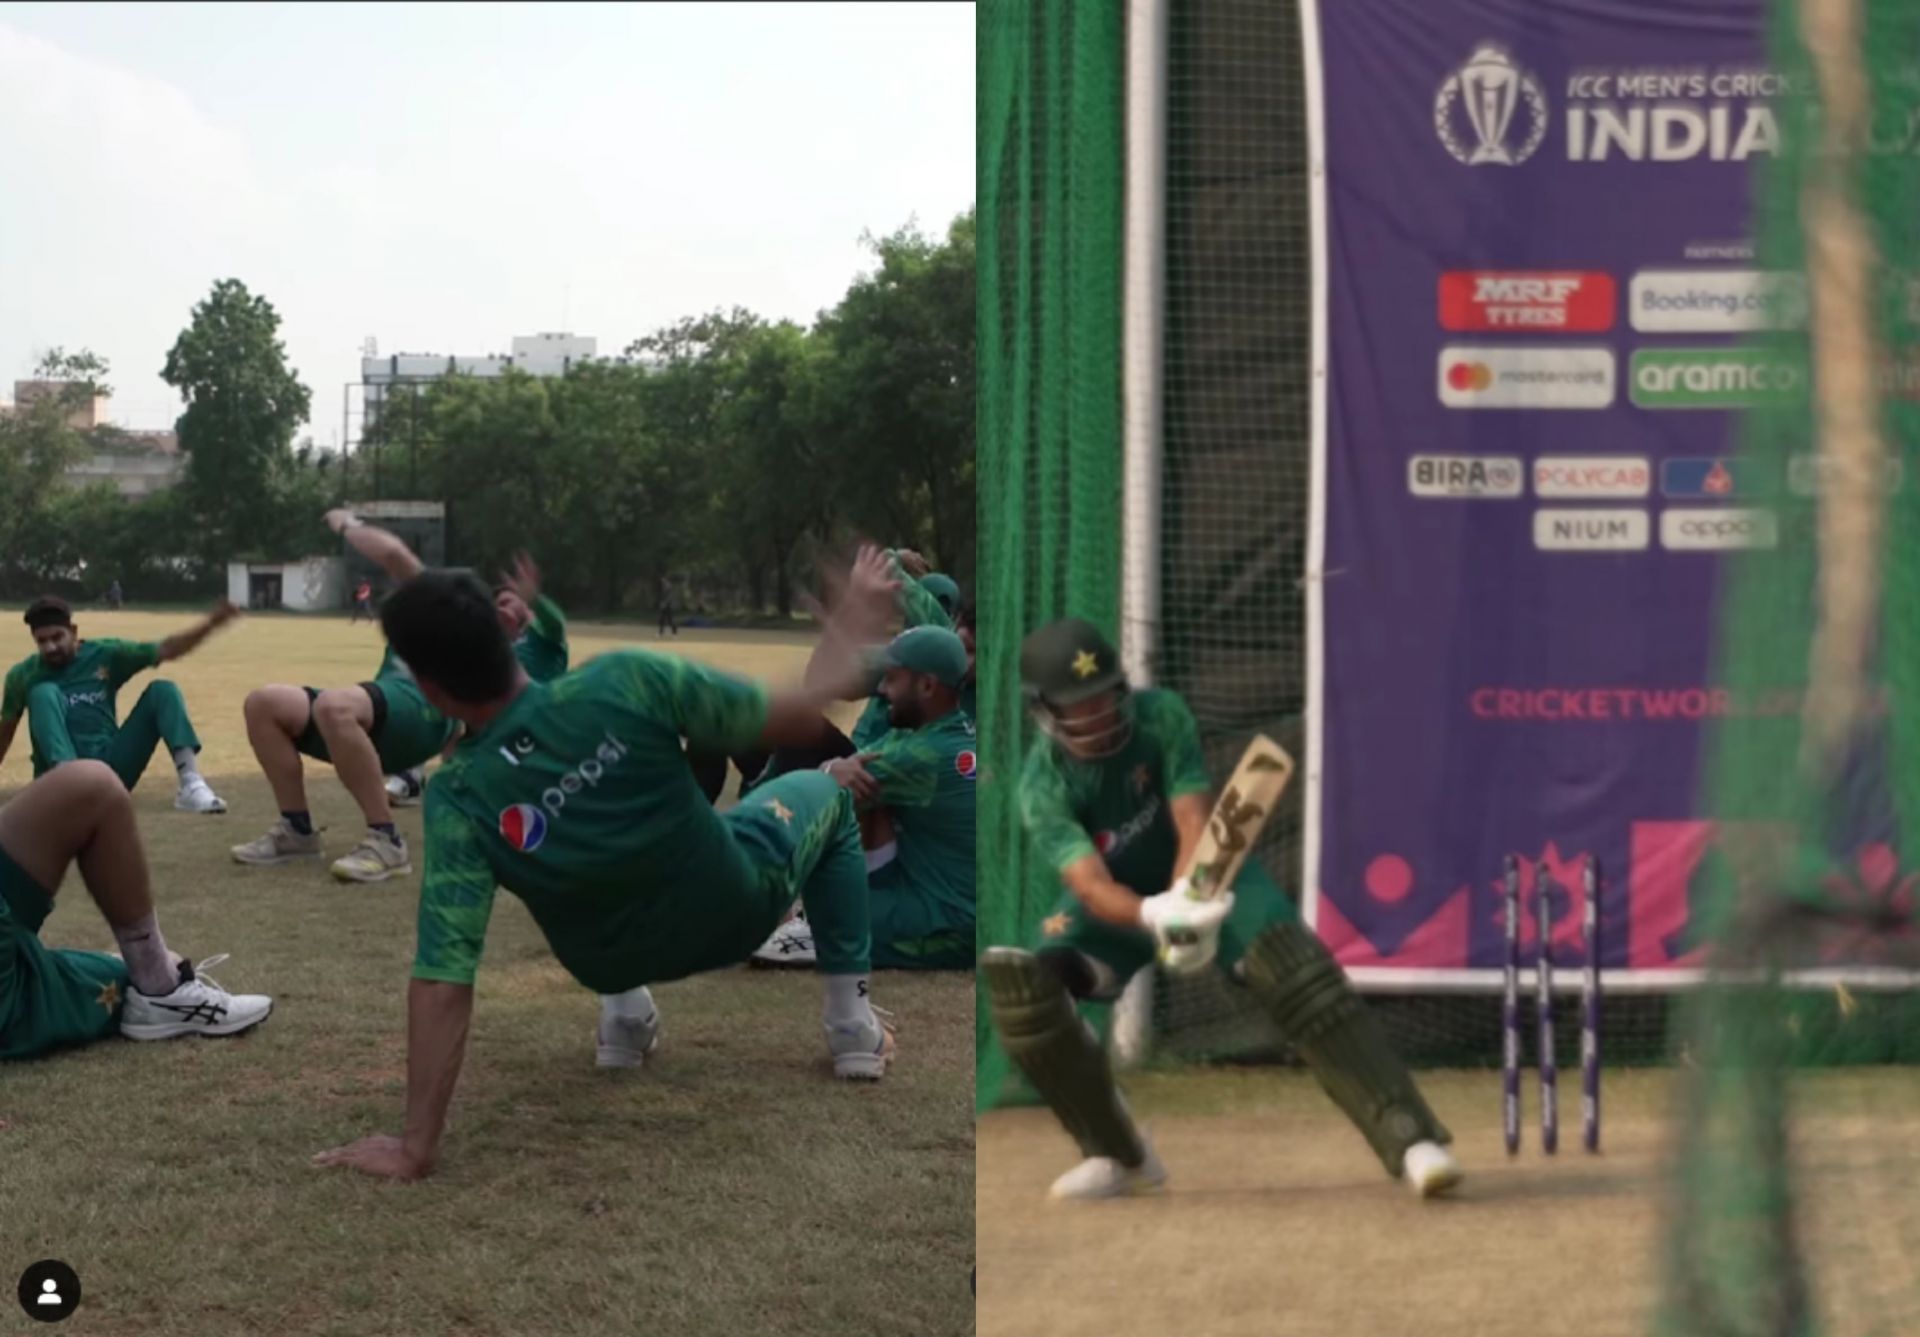 Pakistan players working hard in the nets. 